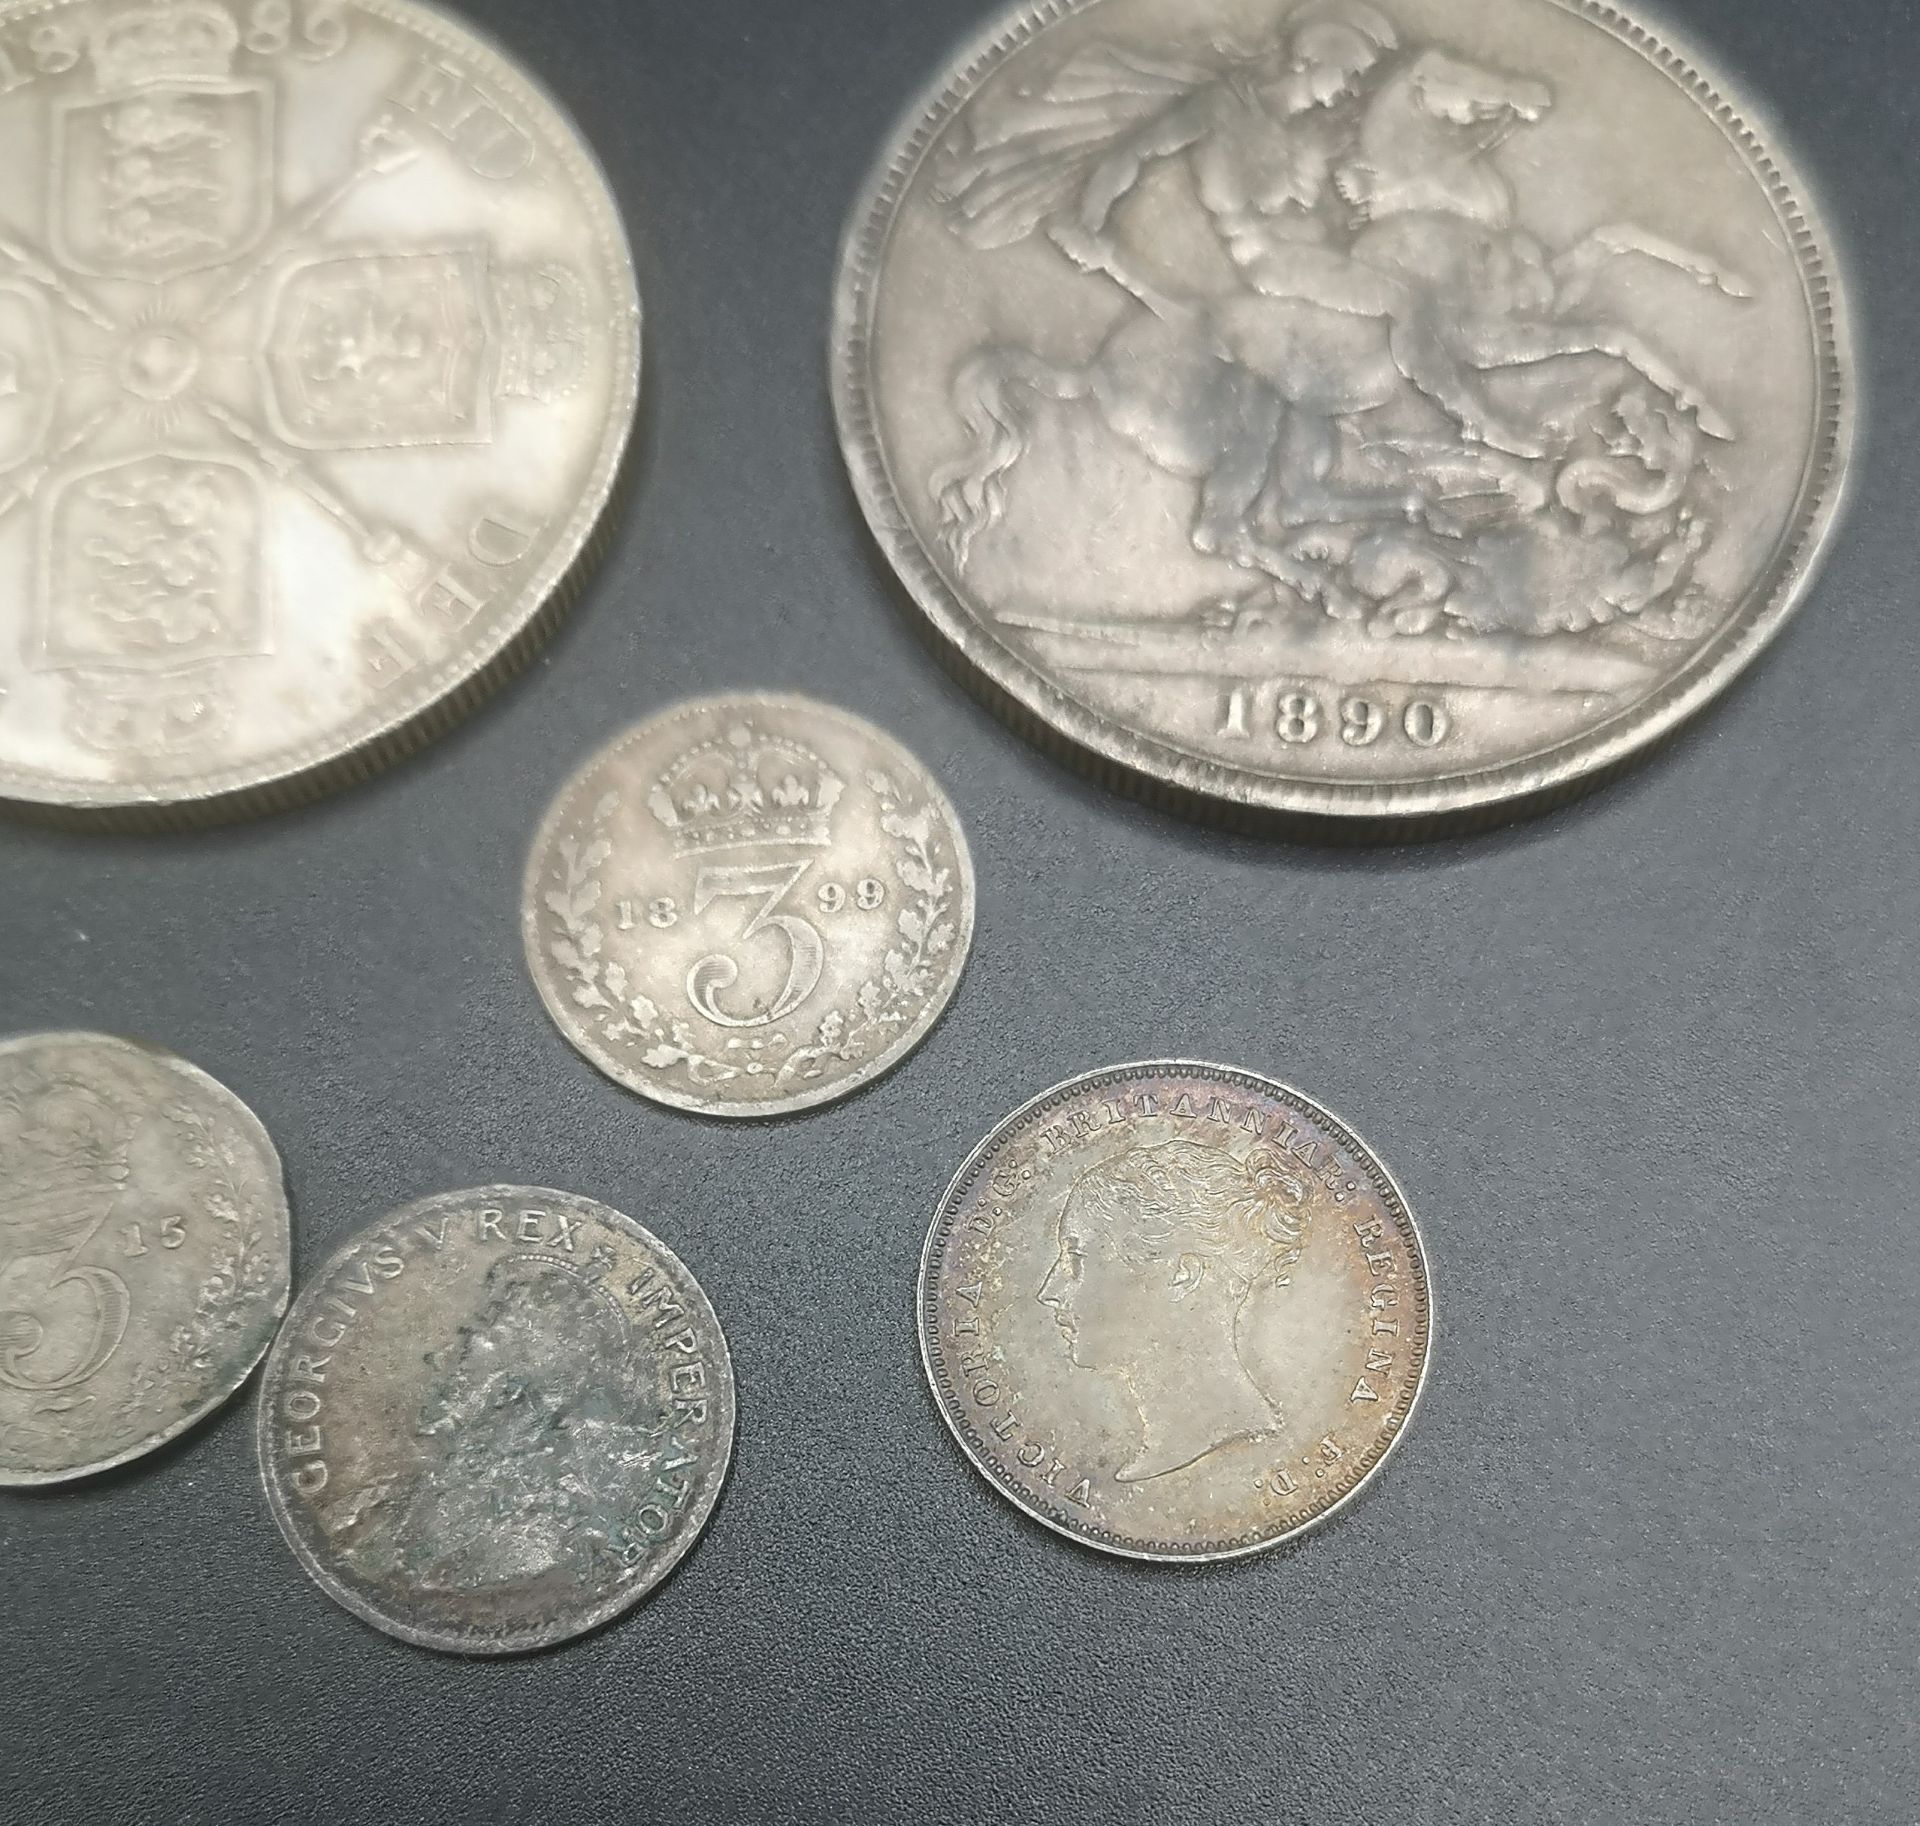 Queen Victoria crown 1890, double florin 1889, and 4 other silver coins - Image 4 of 8